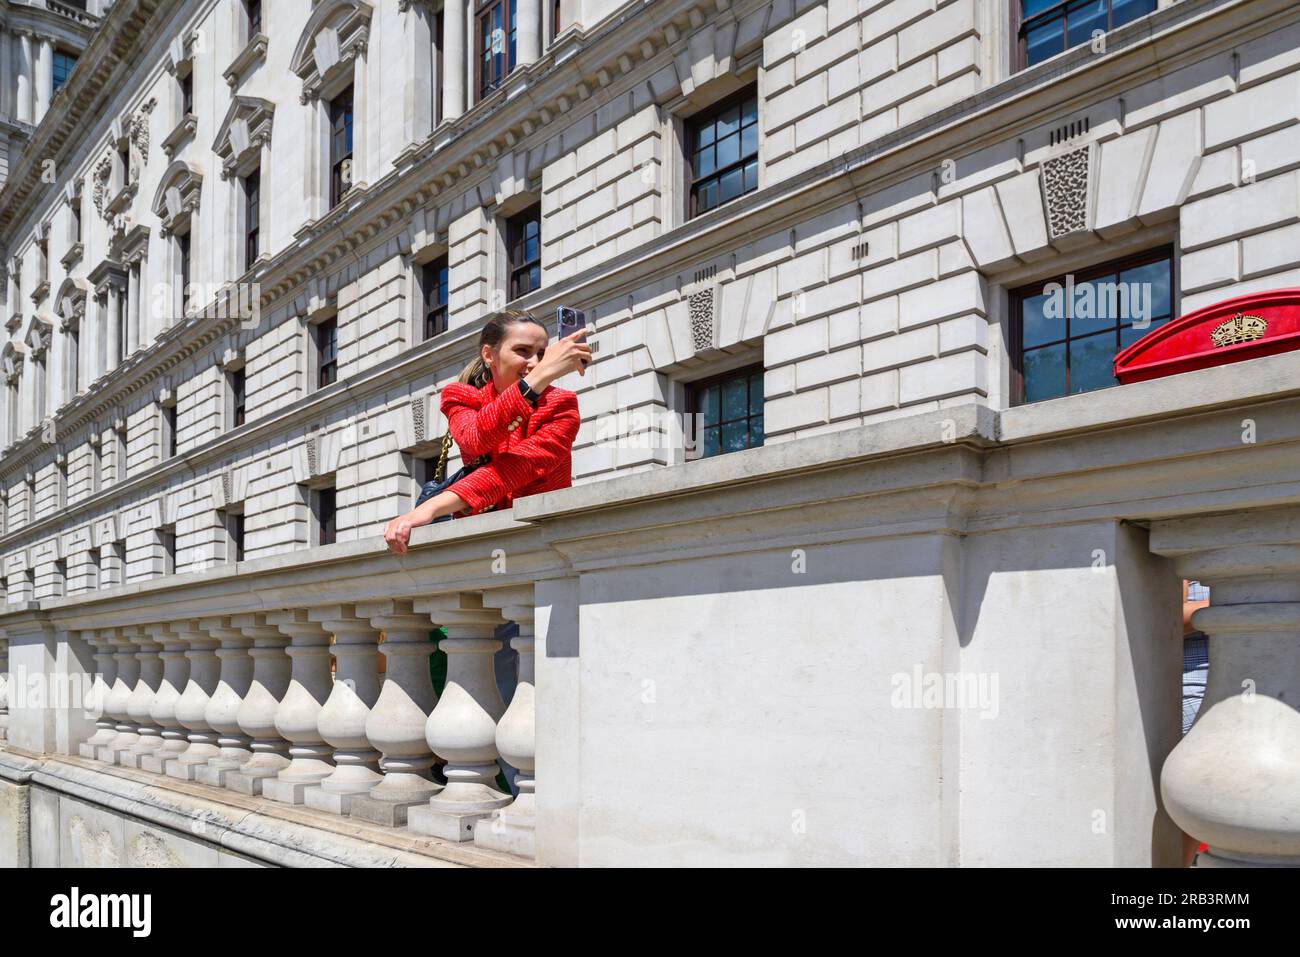 London, UK. Young woman in red taking a selfie in Parliamnt Square, Westminster Stock Photo